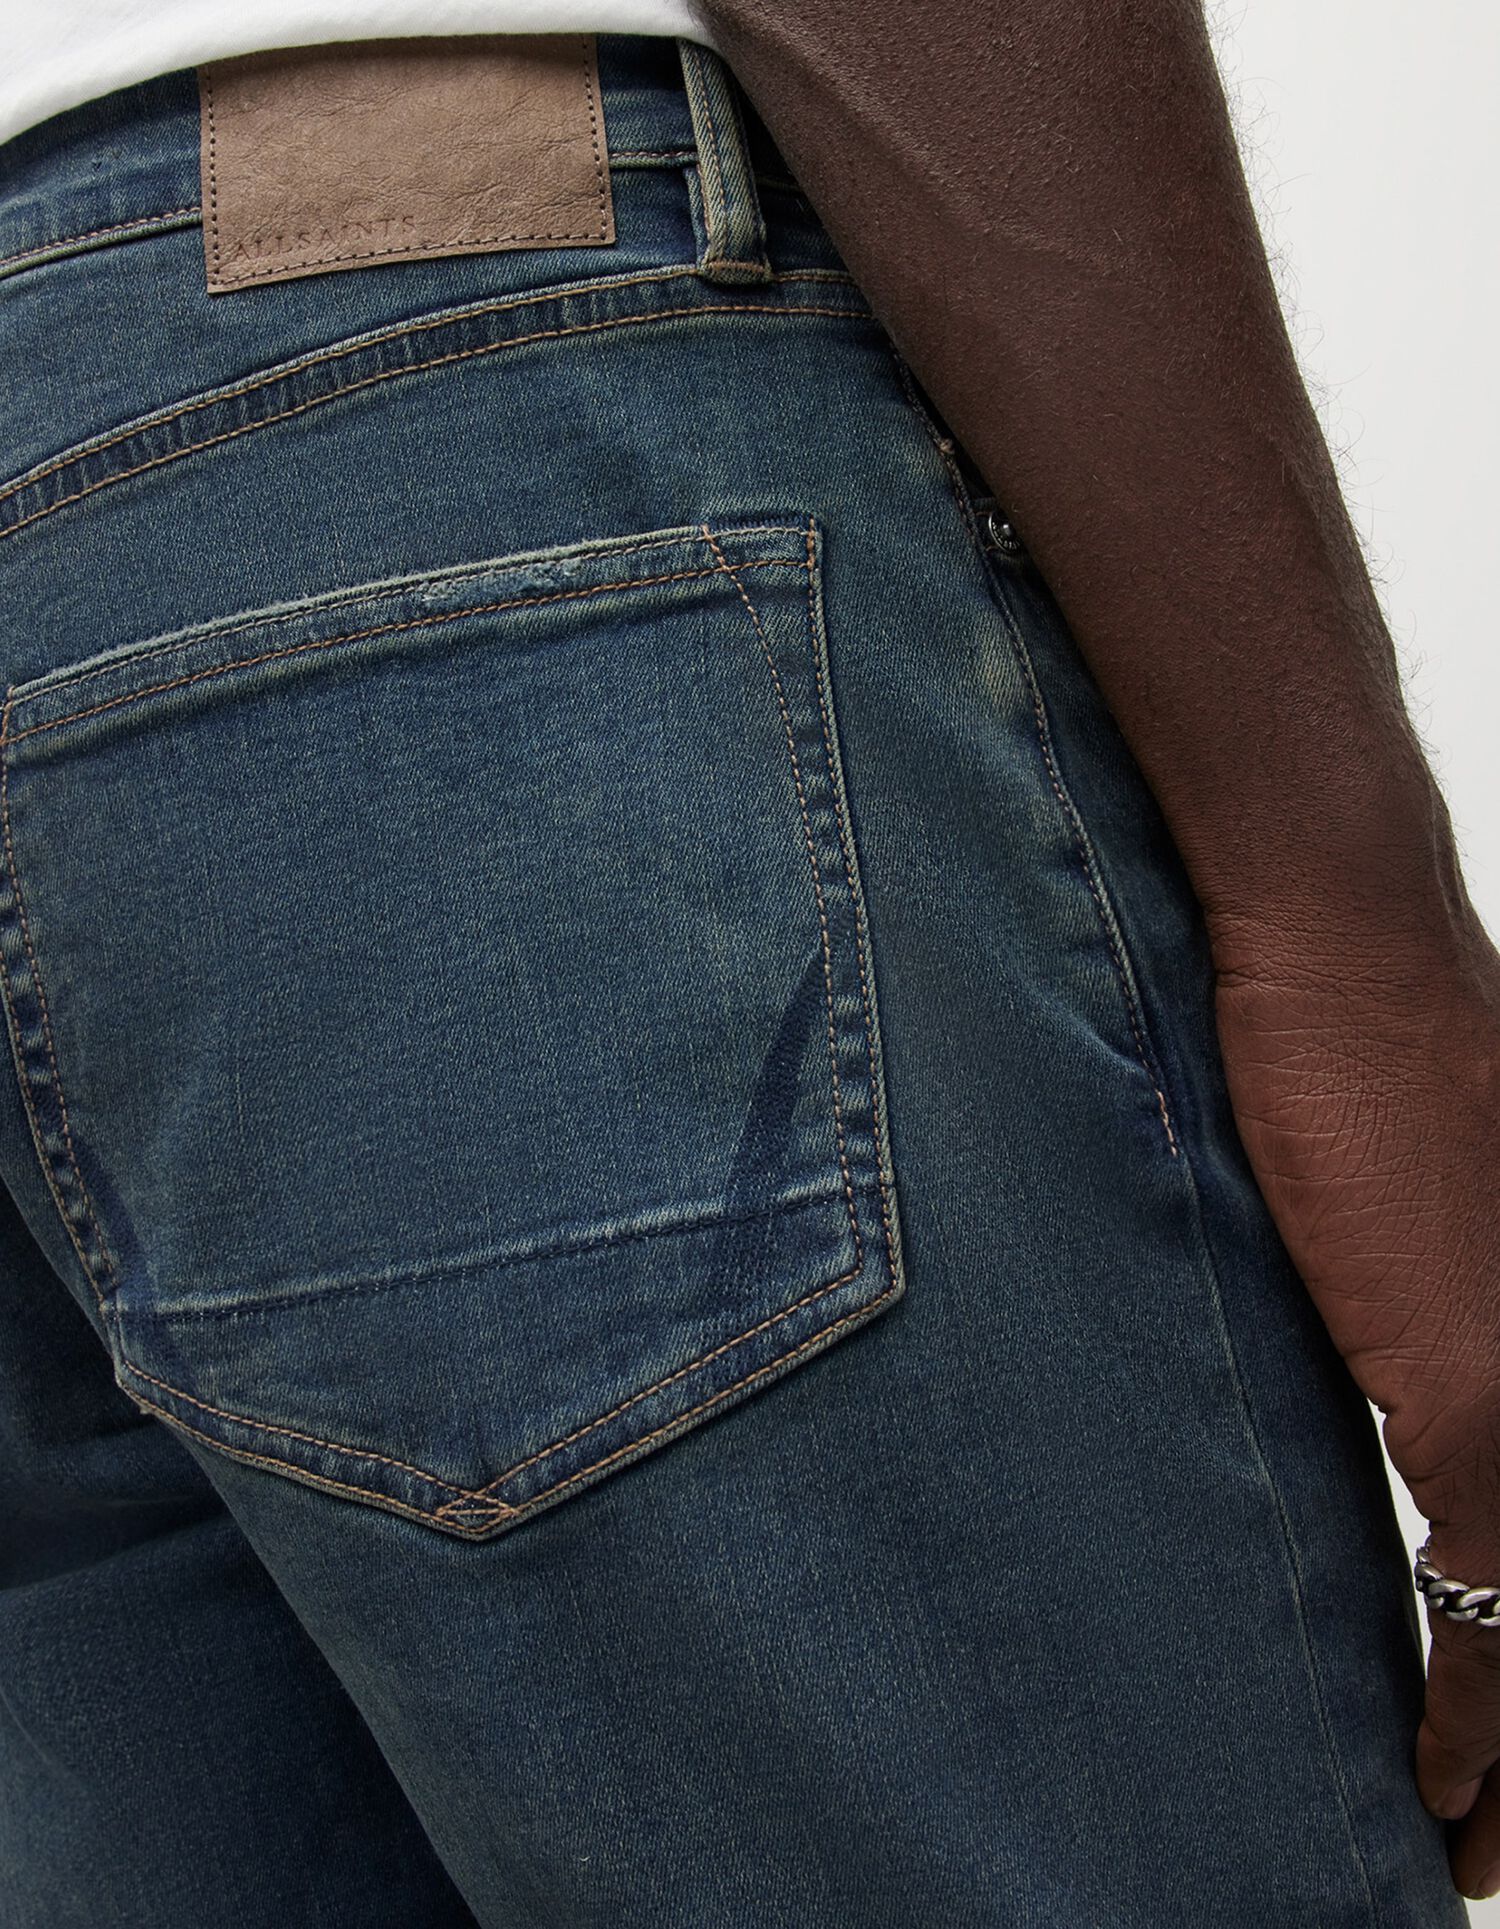 Shop the Ronnie Jeans.